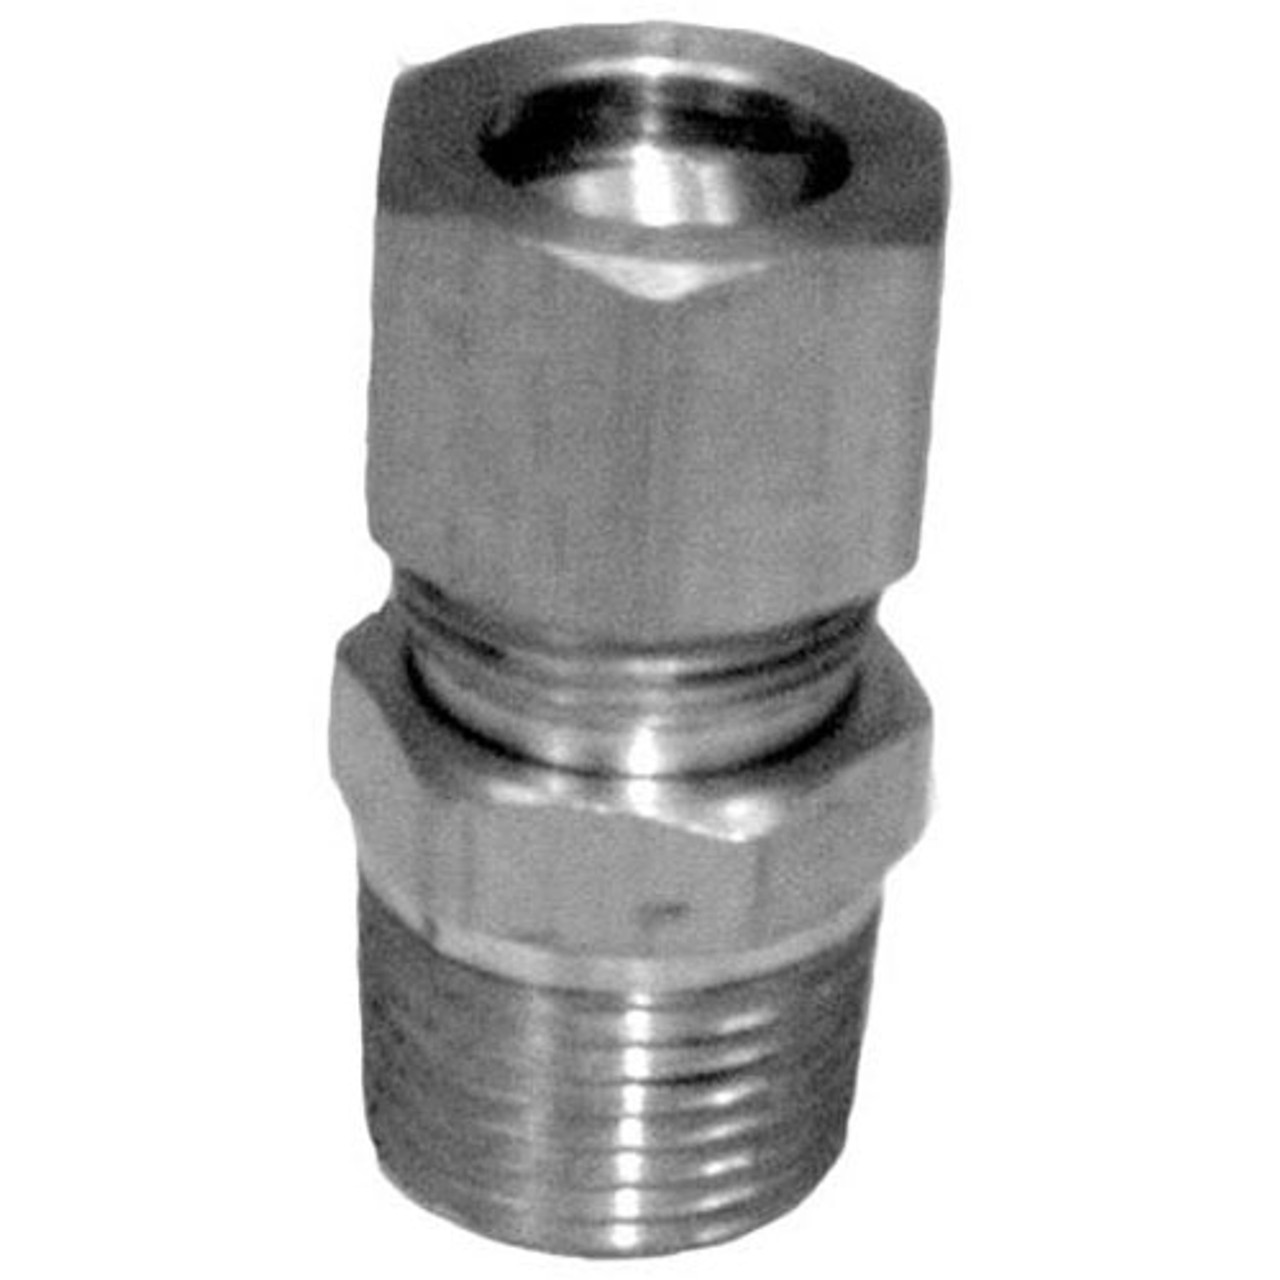 Adapter 7/16 Tube X 3/8 Mpt - Replacement Part For Comstock Castle 25050